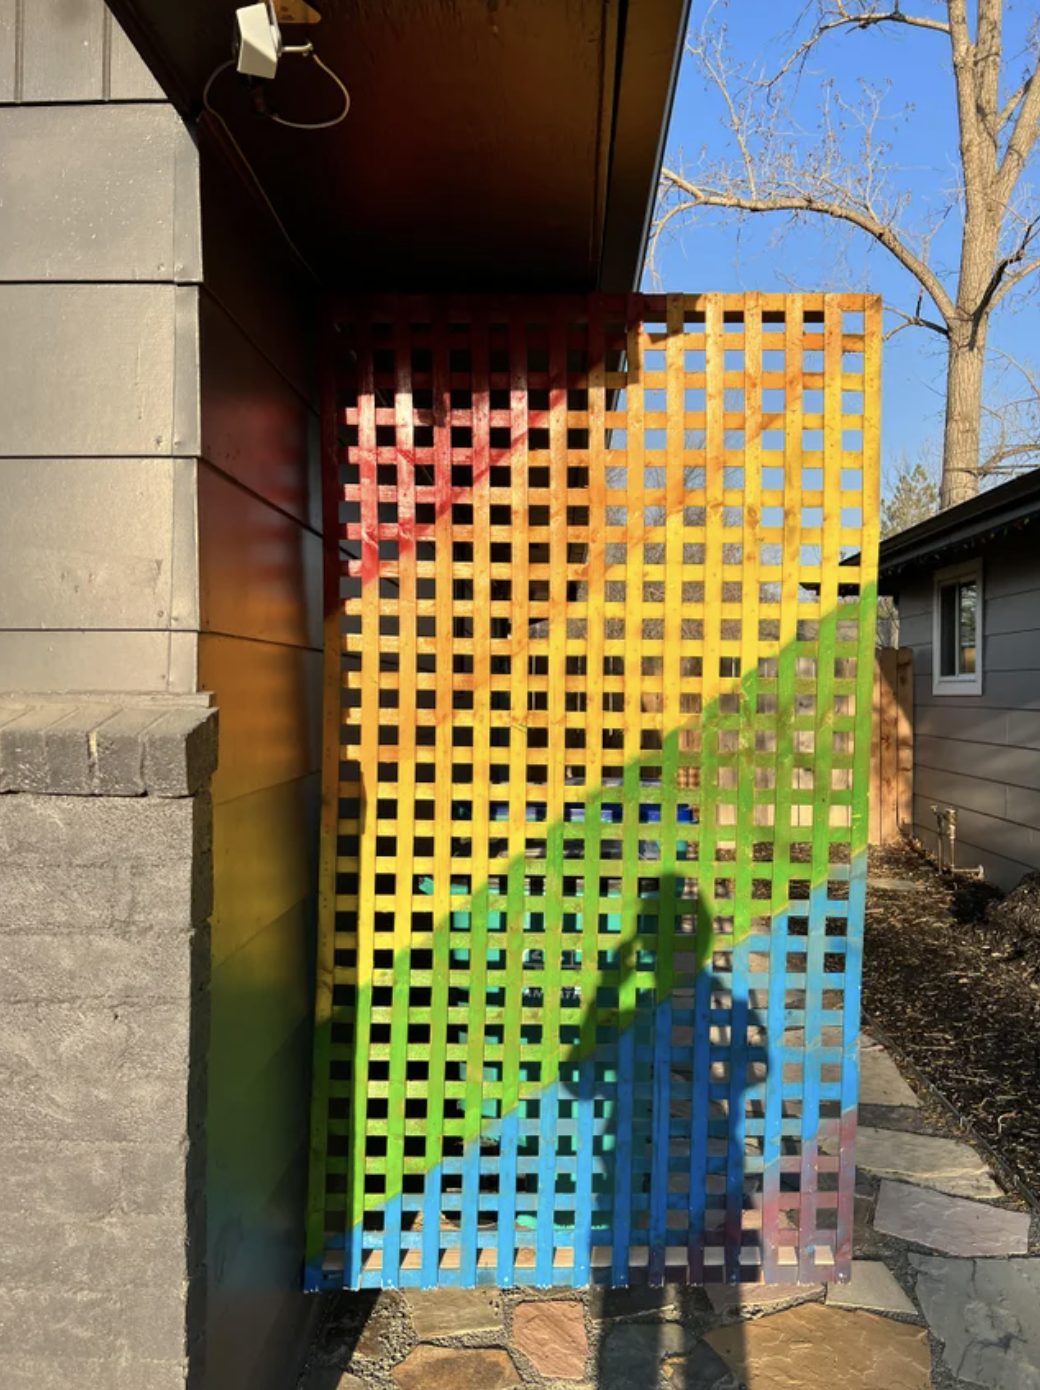 A rainbow-covered lattice on the side of a building